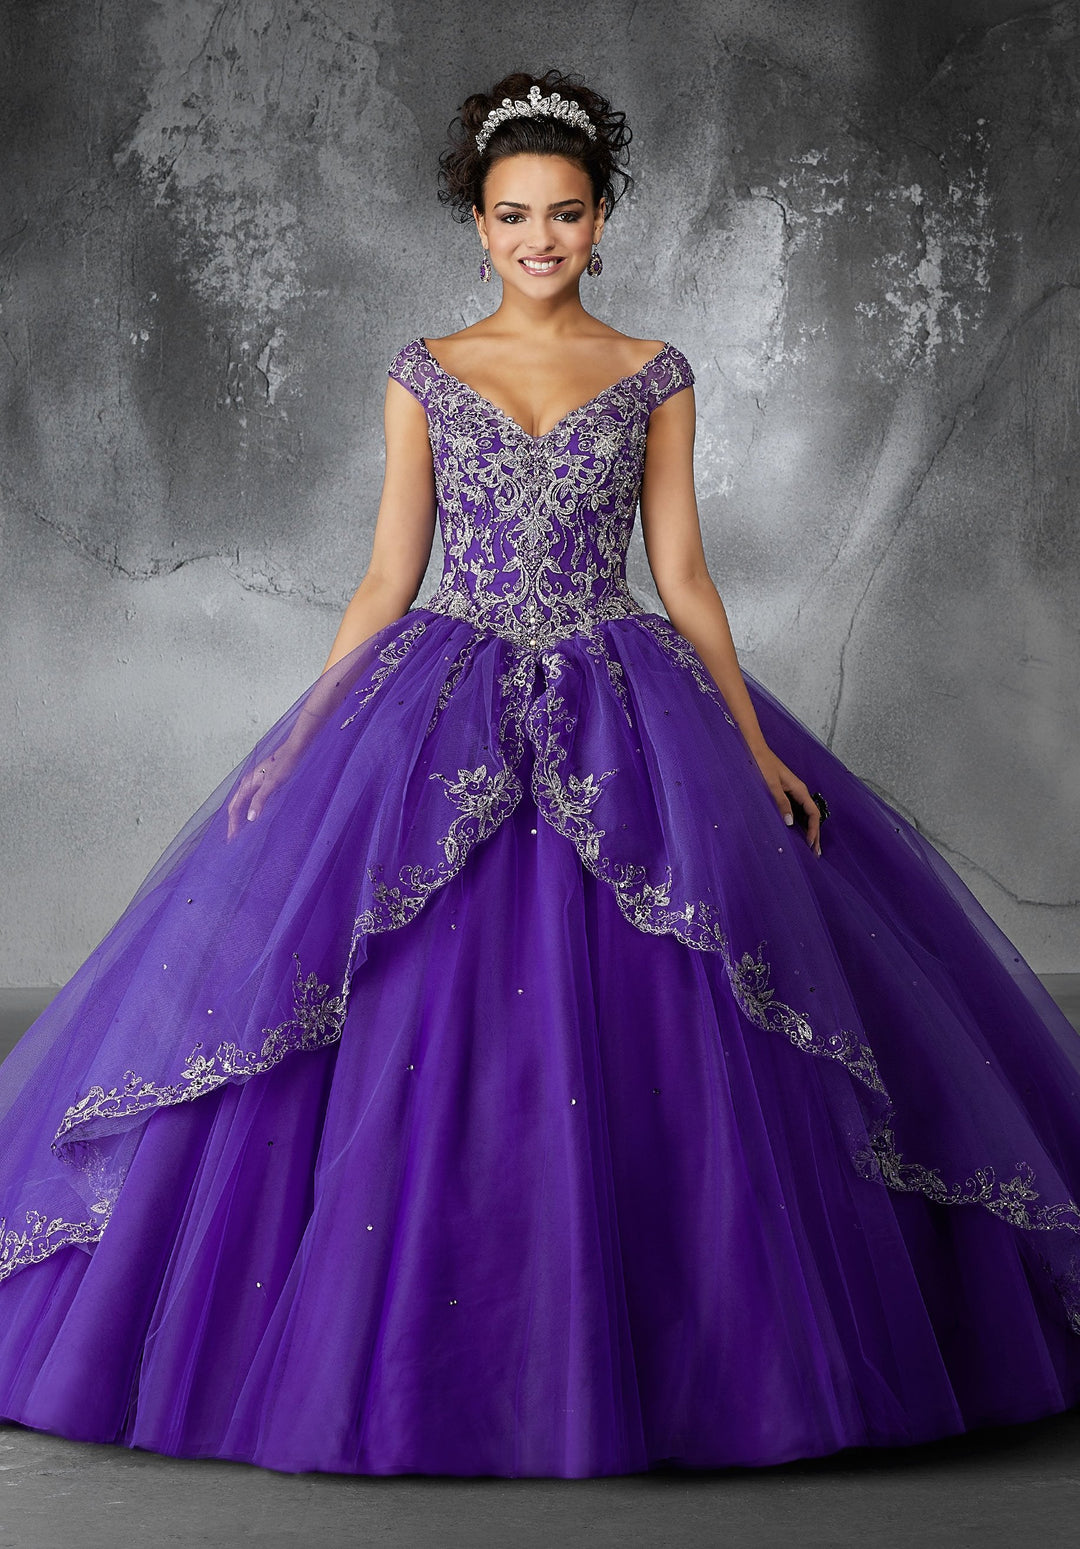 Margaret on a Princess Tulle Ballgown - MoriLee #60054